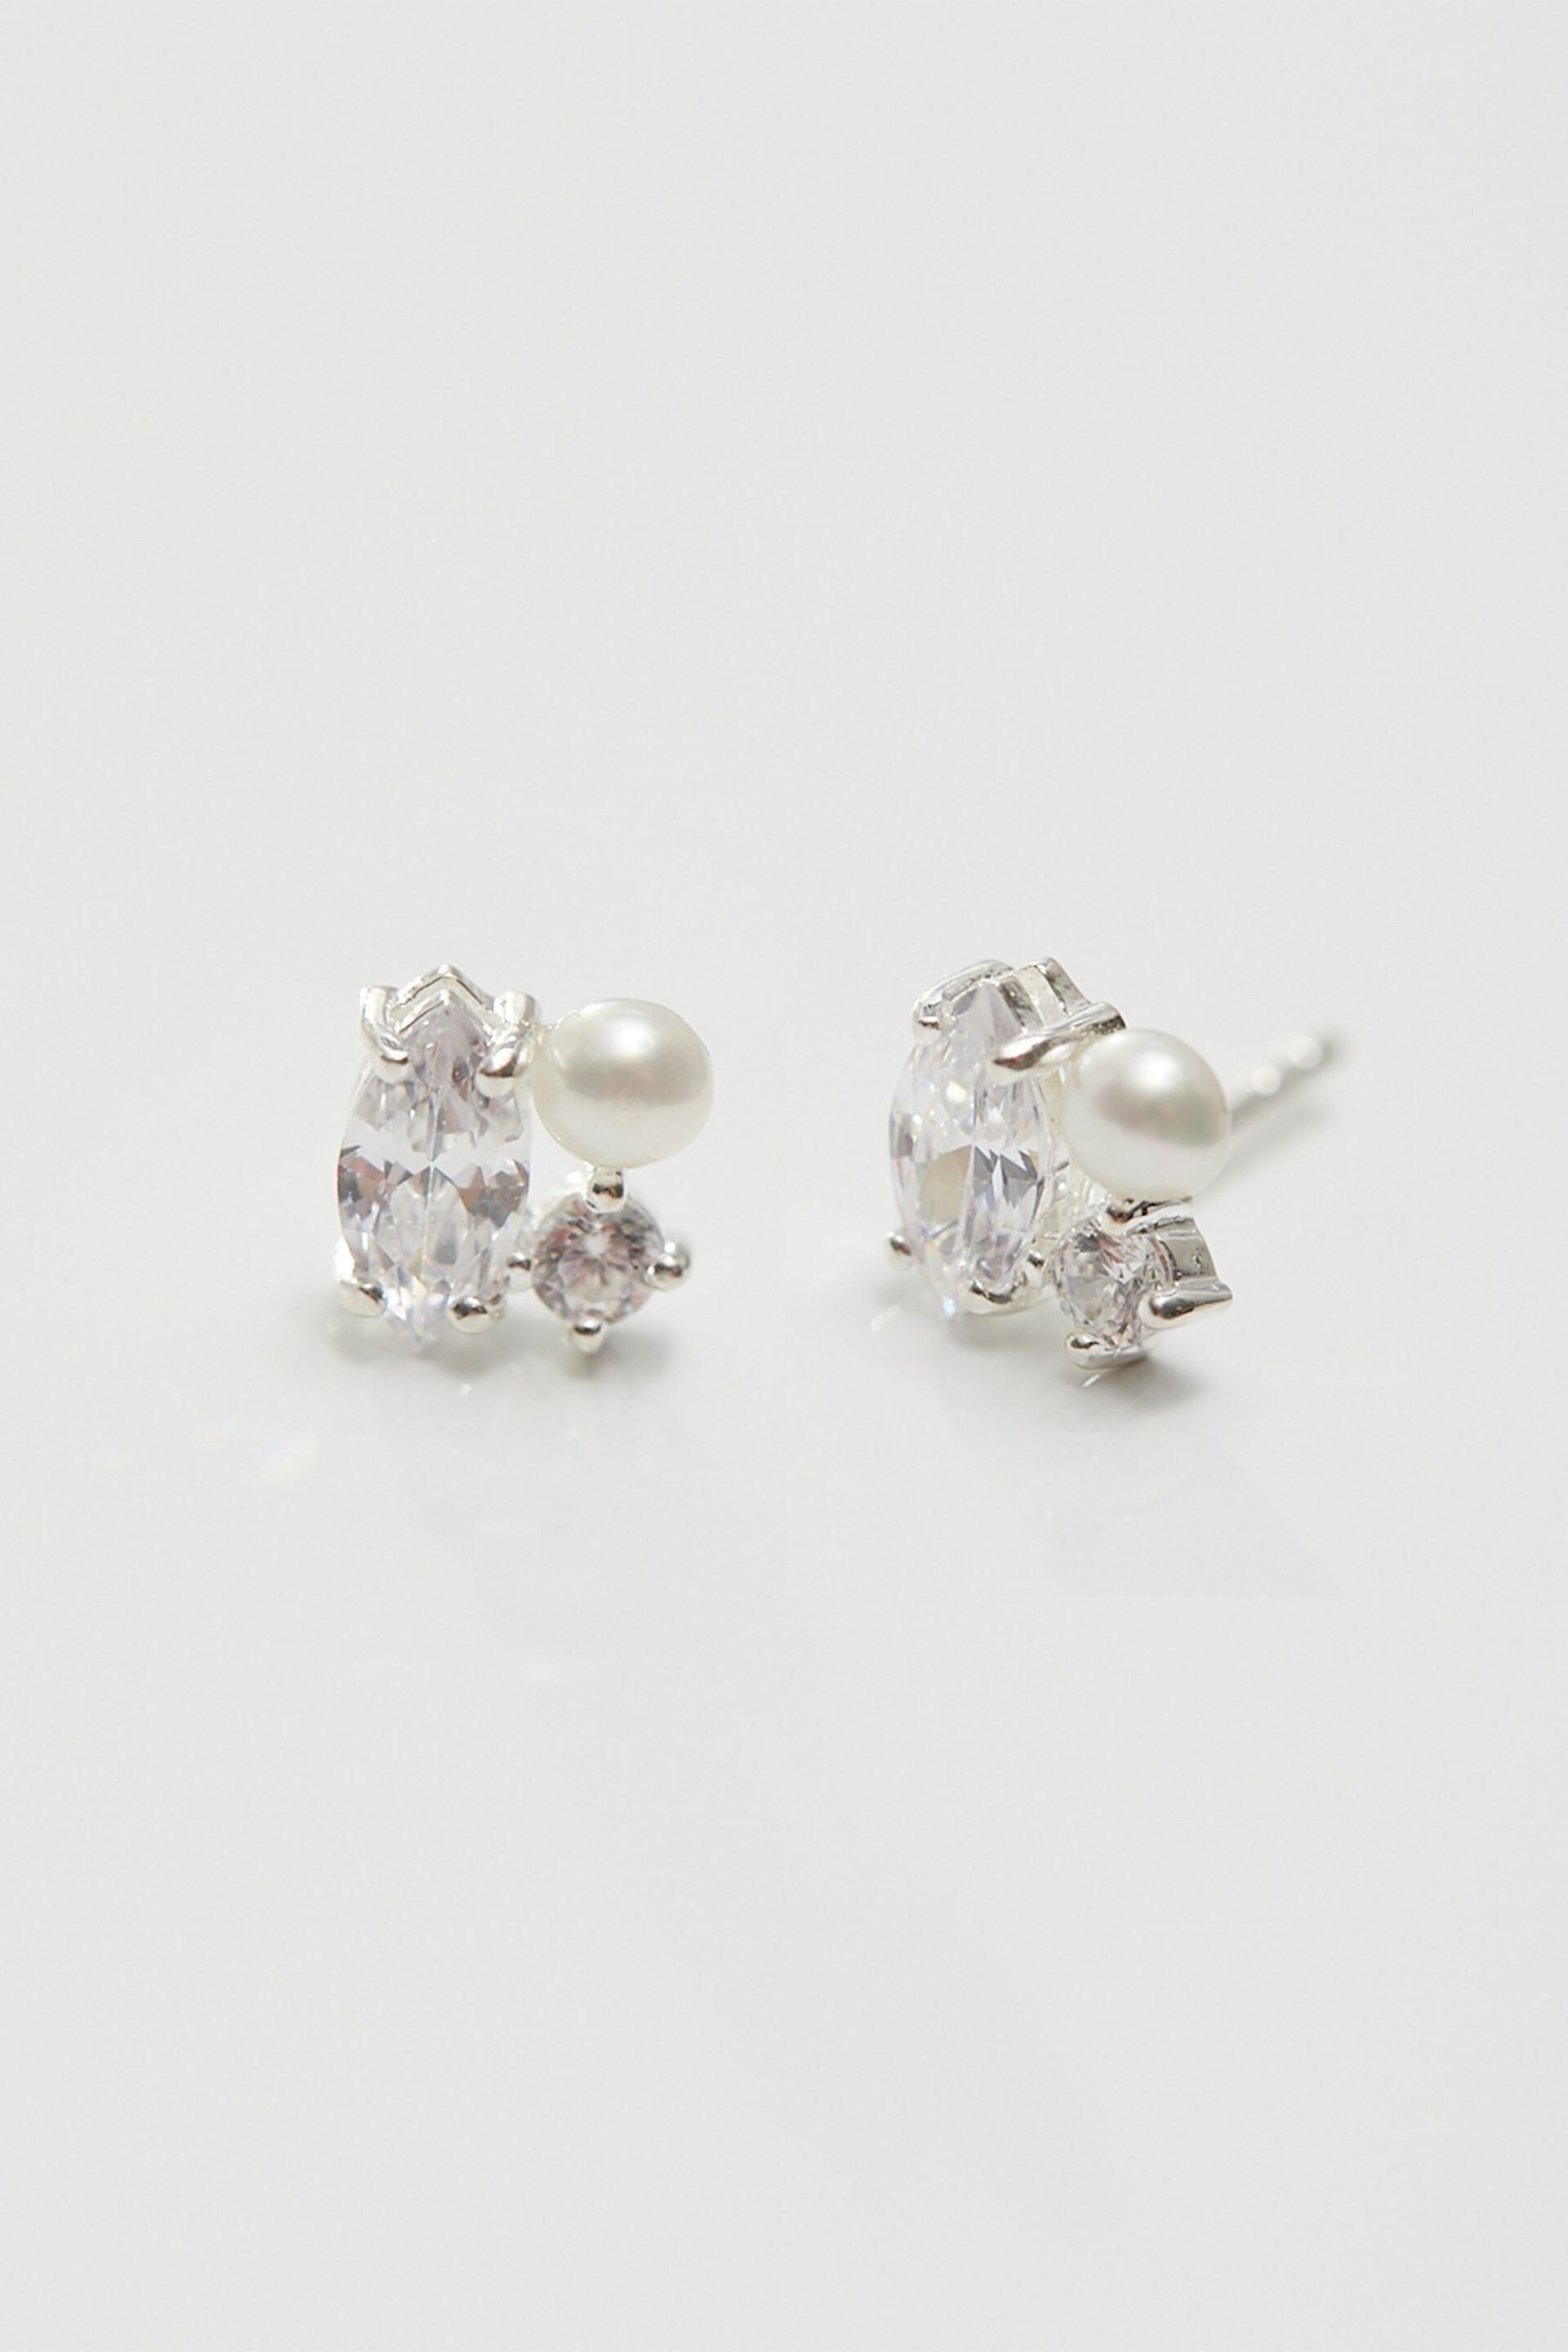 Simply Silver Silver Tone Cubic Zirconia And Freshwater Pearl Multi Stone Stud Earrings - Image 1 of 2